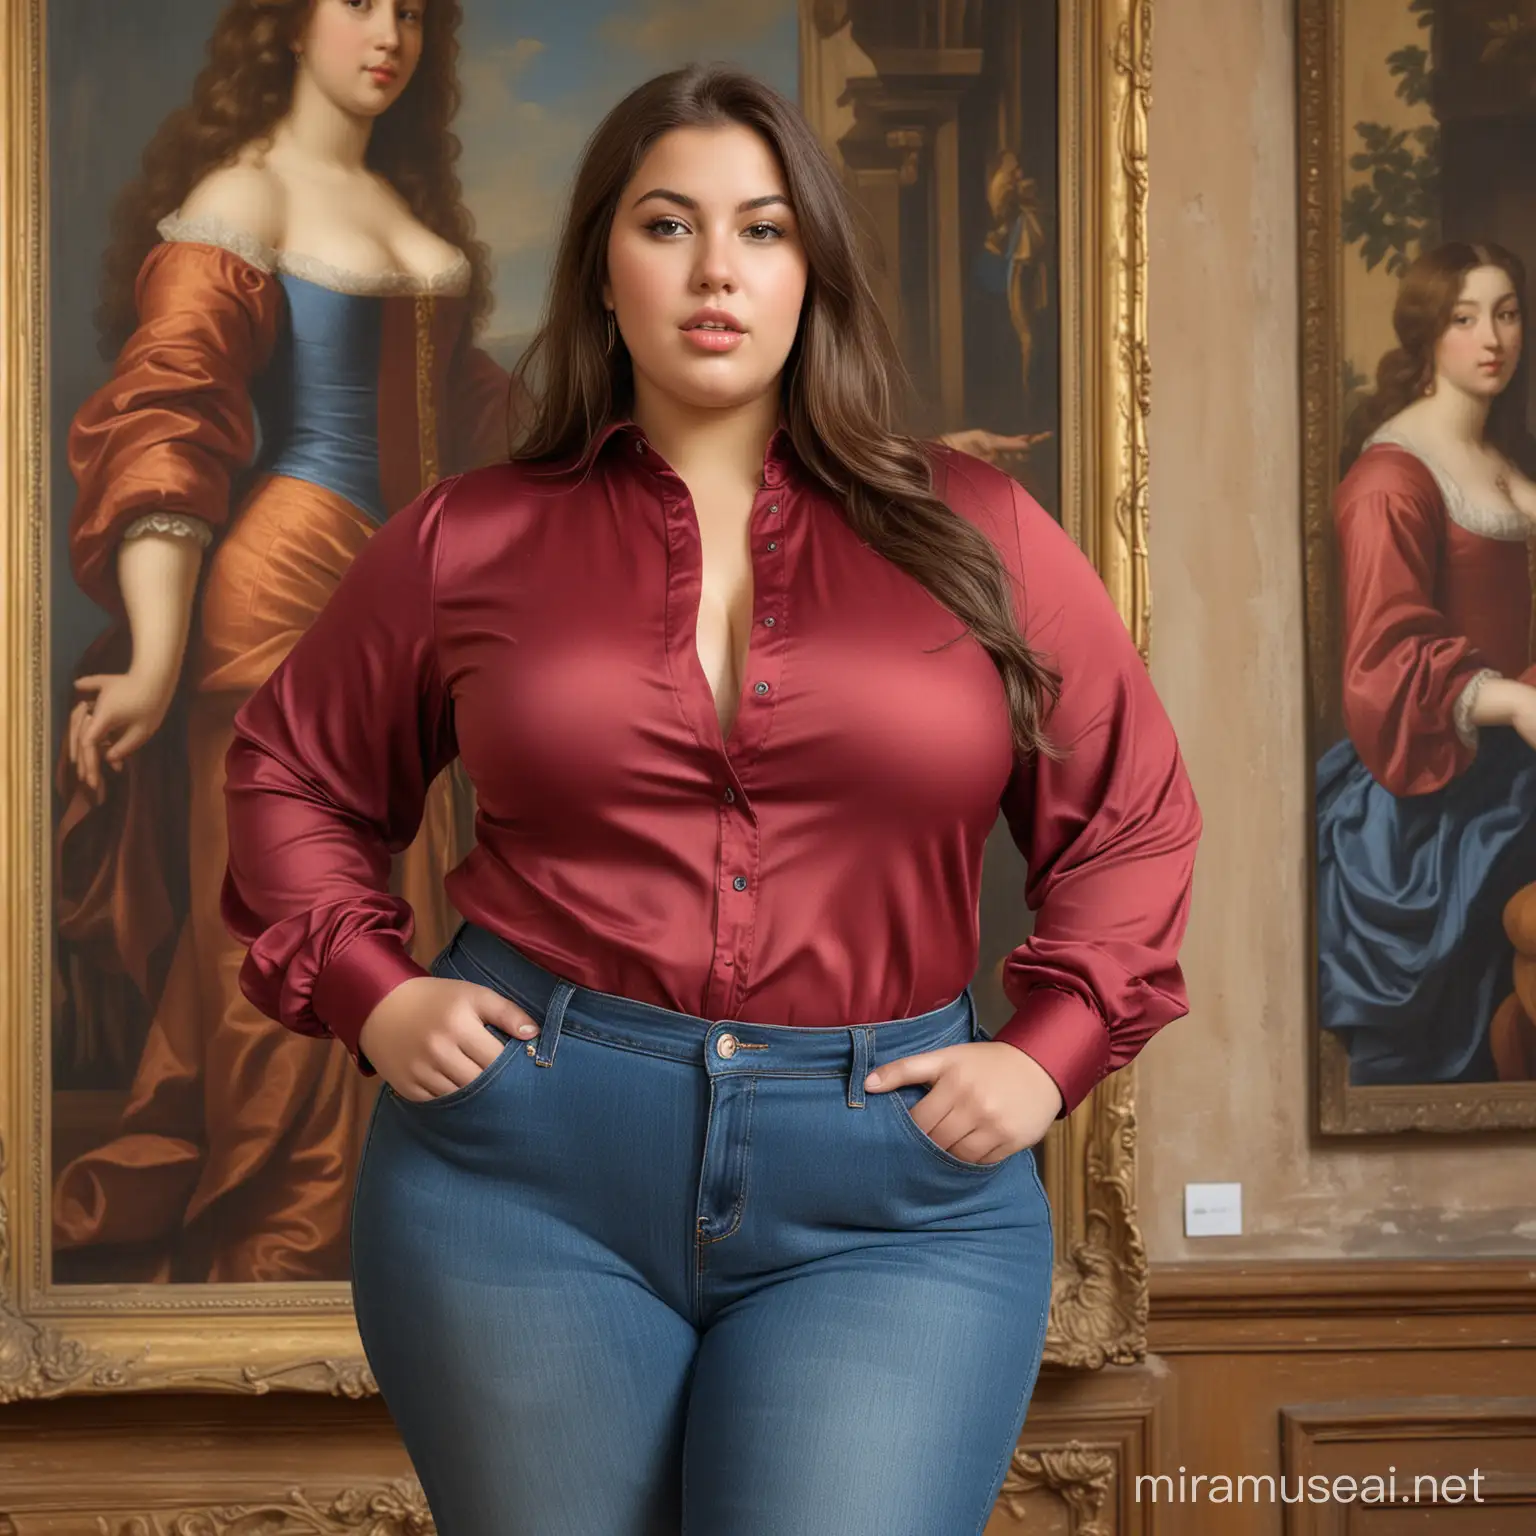 A young BBW, weight 210 lbs, long straight brown hair, large brown eyes, sensuous mouth, very tanned, wide hips, wearing a silk maroon shirt and designer blue jeans, stands full figure. In the background an exhibition of baroque painting